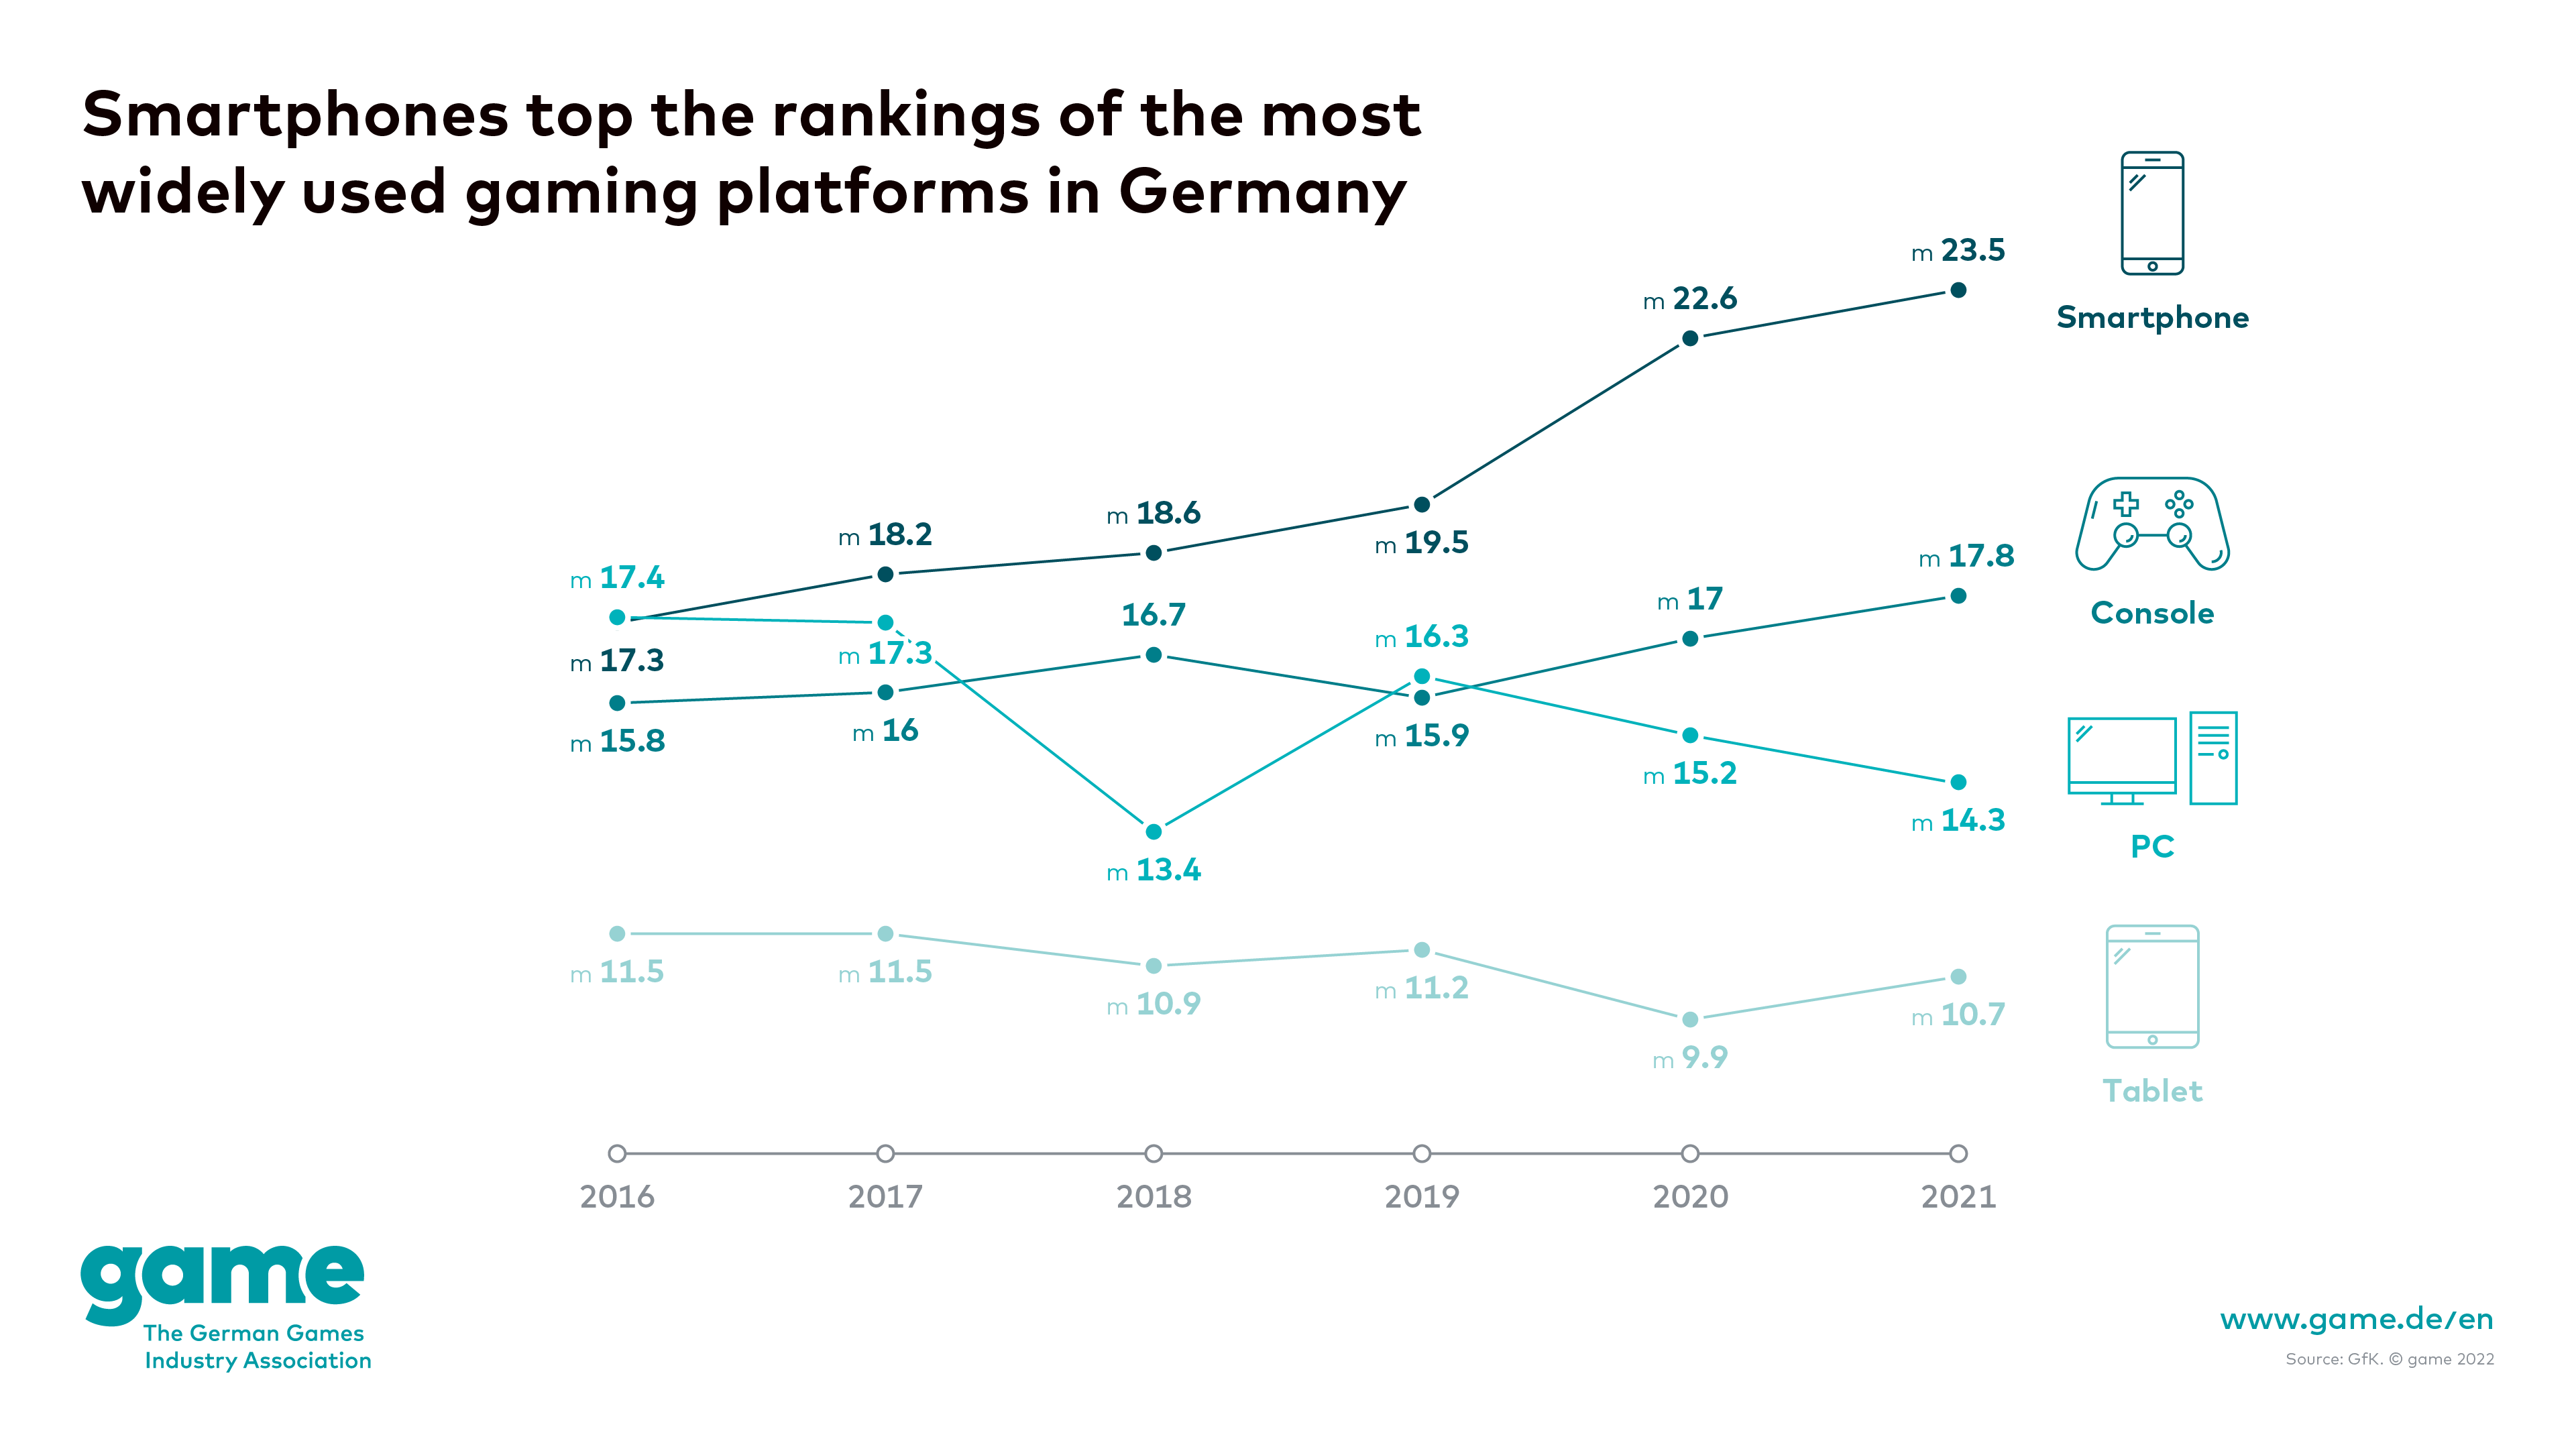 Smartphones top the rankings of the most widely used gaming platforms in Germany